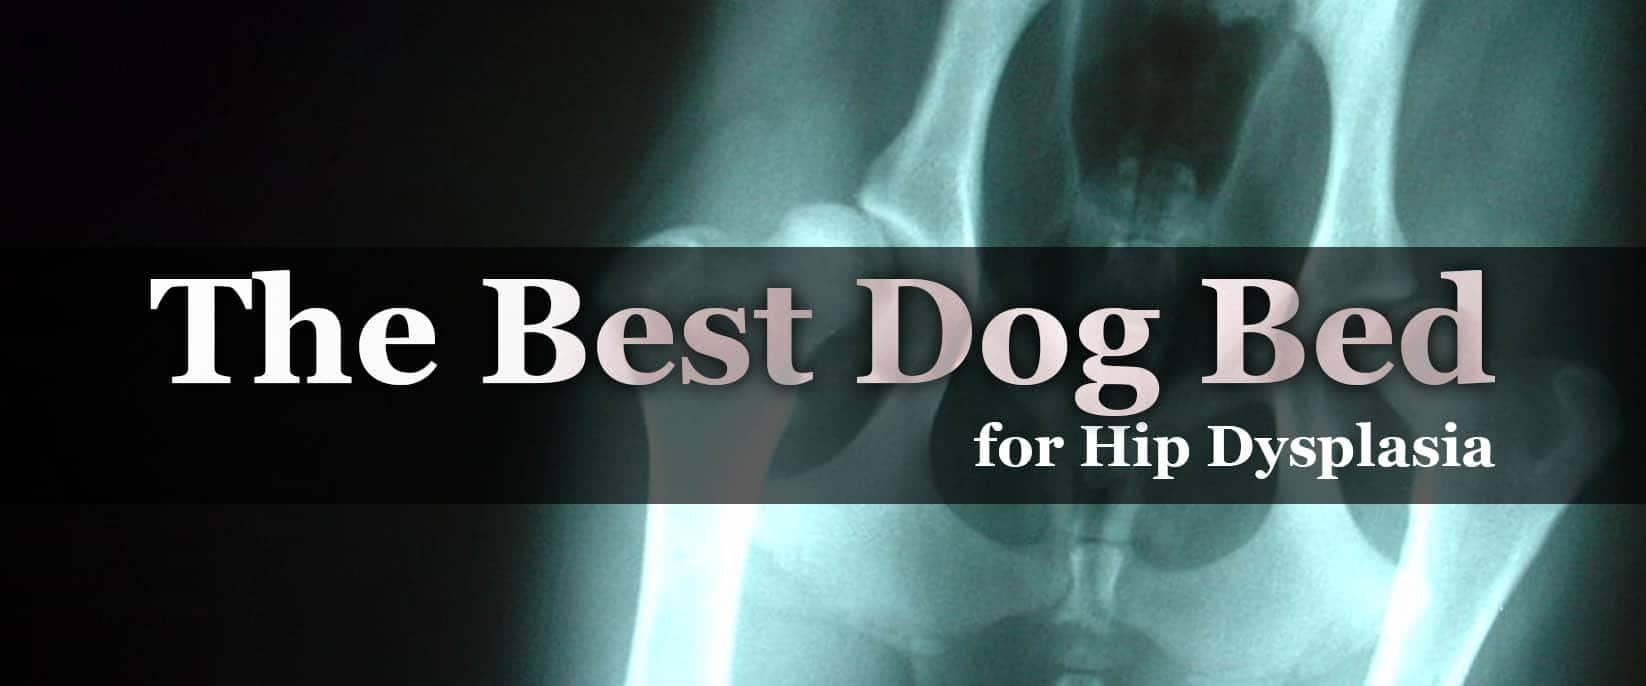 The Best Dog Bed for Hip Dysplasia